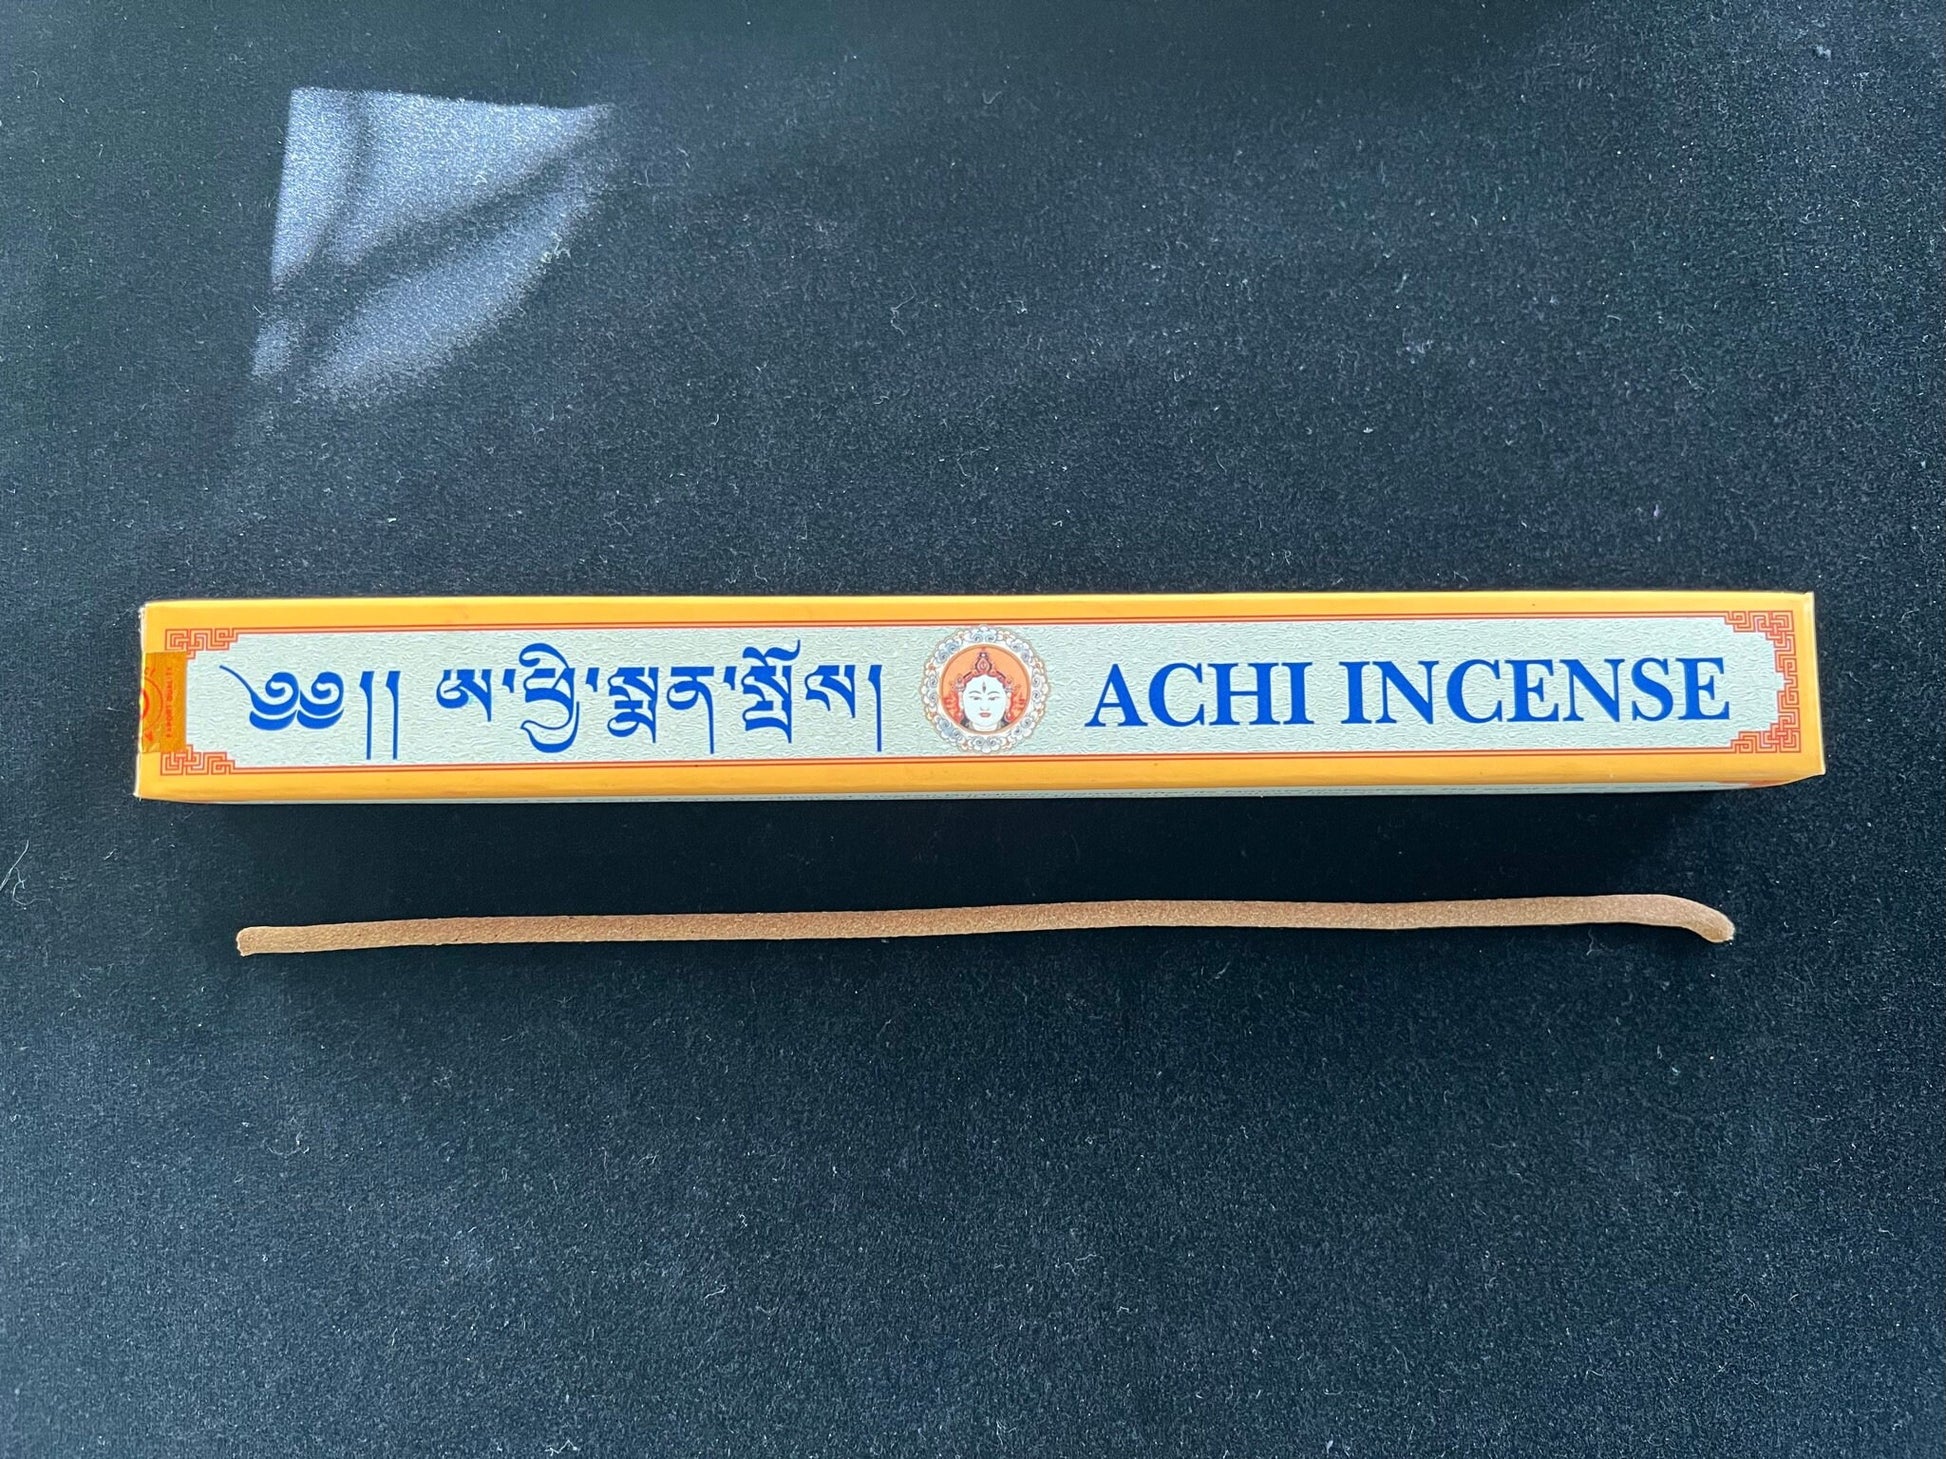 Achi Incense box with one stick on black velvet. Try our specialty incense for an enhanced meditation experience.